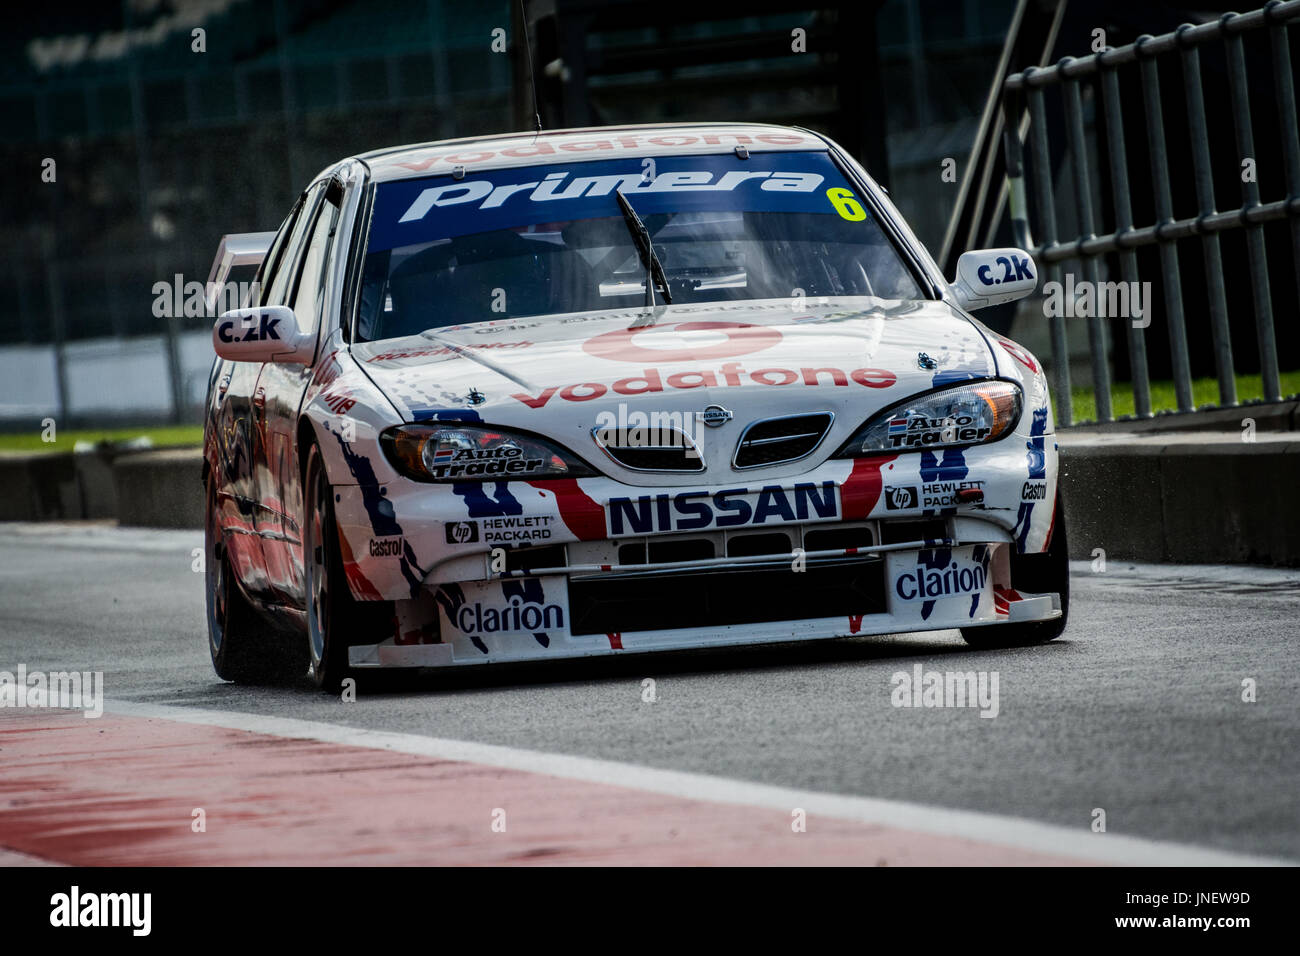 Towcester, Northamptonshire, UK. 30th July, 2017. Ex BTCC Nissan Primera during Historic Touring Car Silverstone Classic Motor Racing Festival at Silverstone Circuit (Photo by Gergo Toth / Alamy Live News) Stock Photo